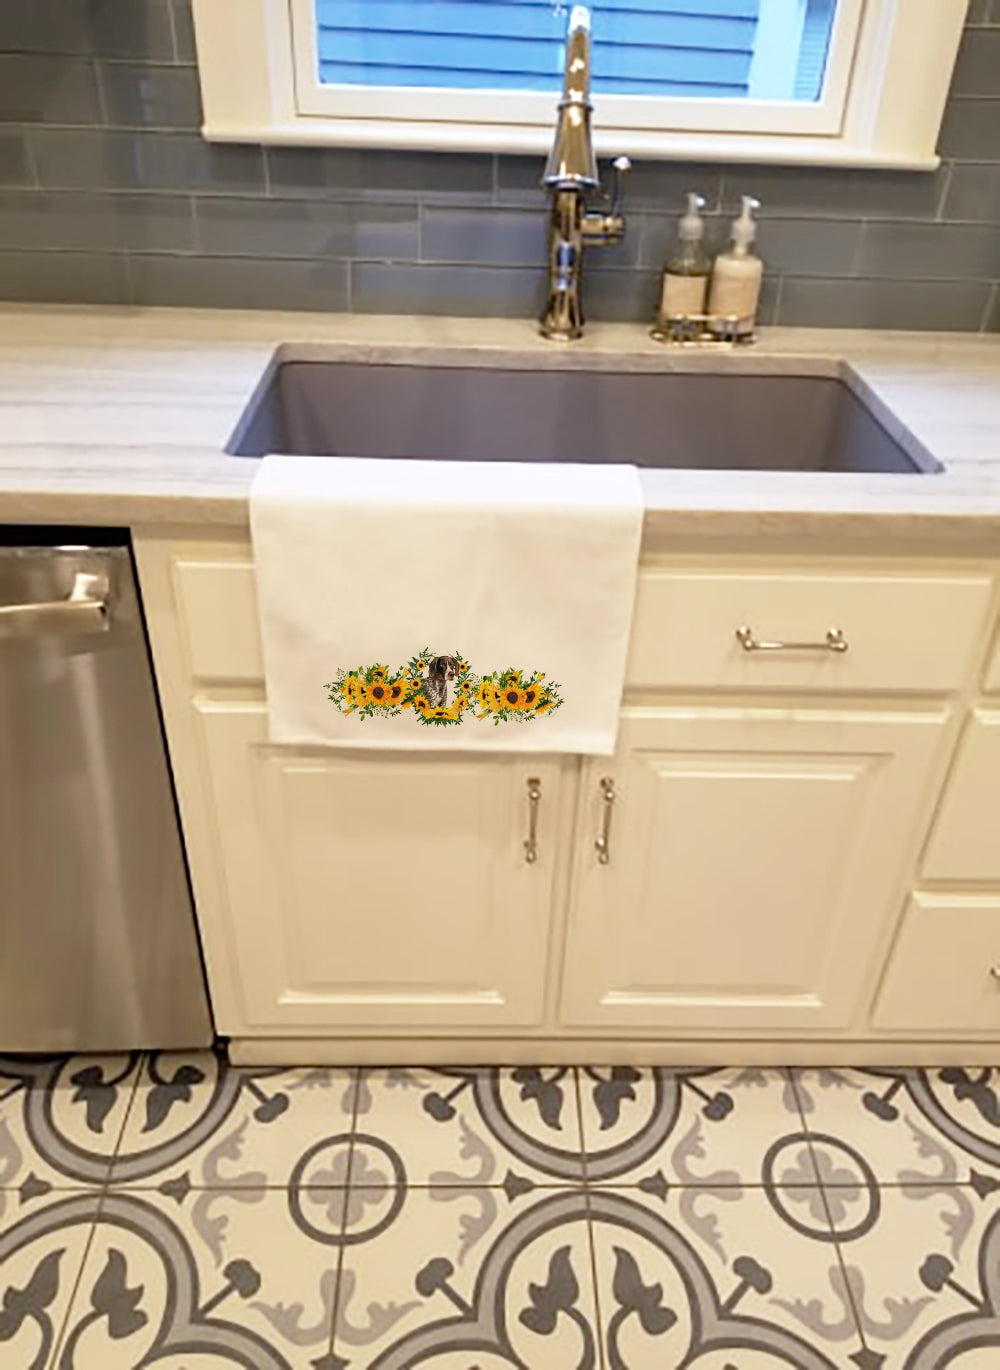 Buy this German Shorthaired Pointer in Sunflowers White Kitchen Towel Set of 2